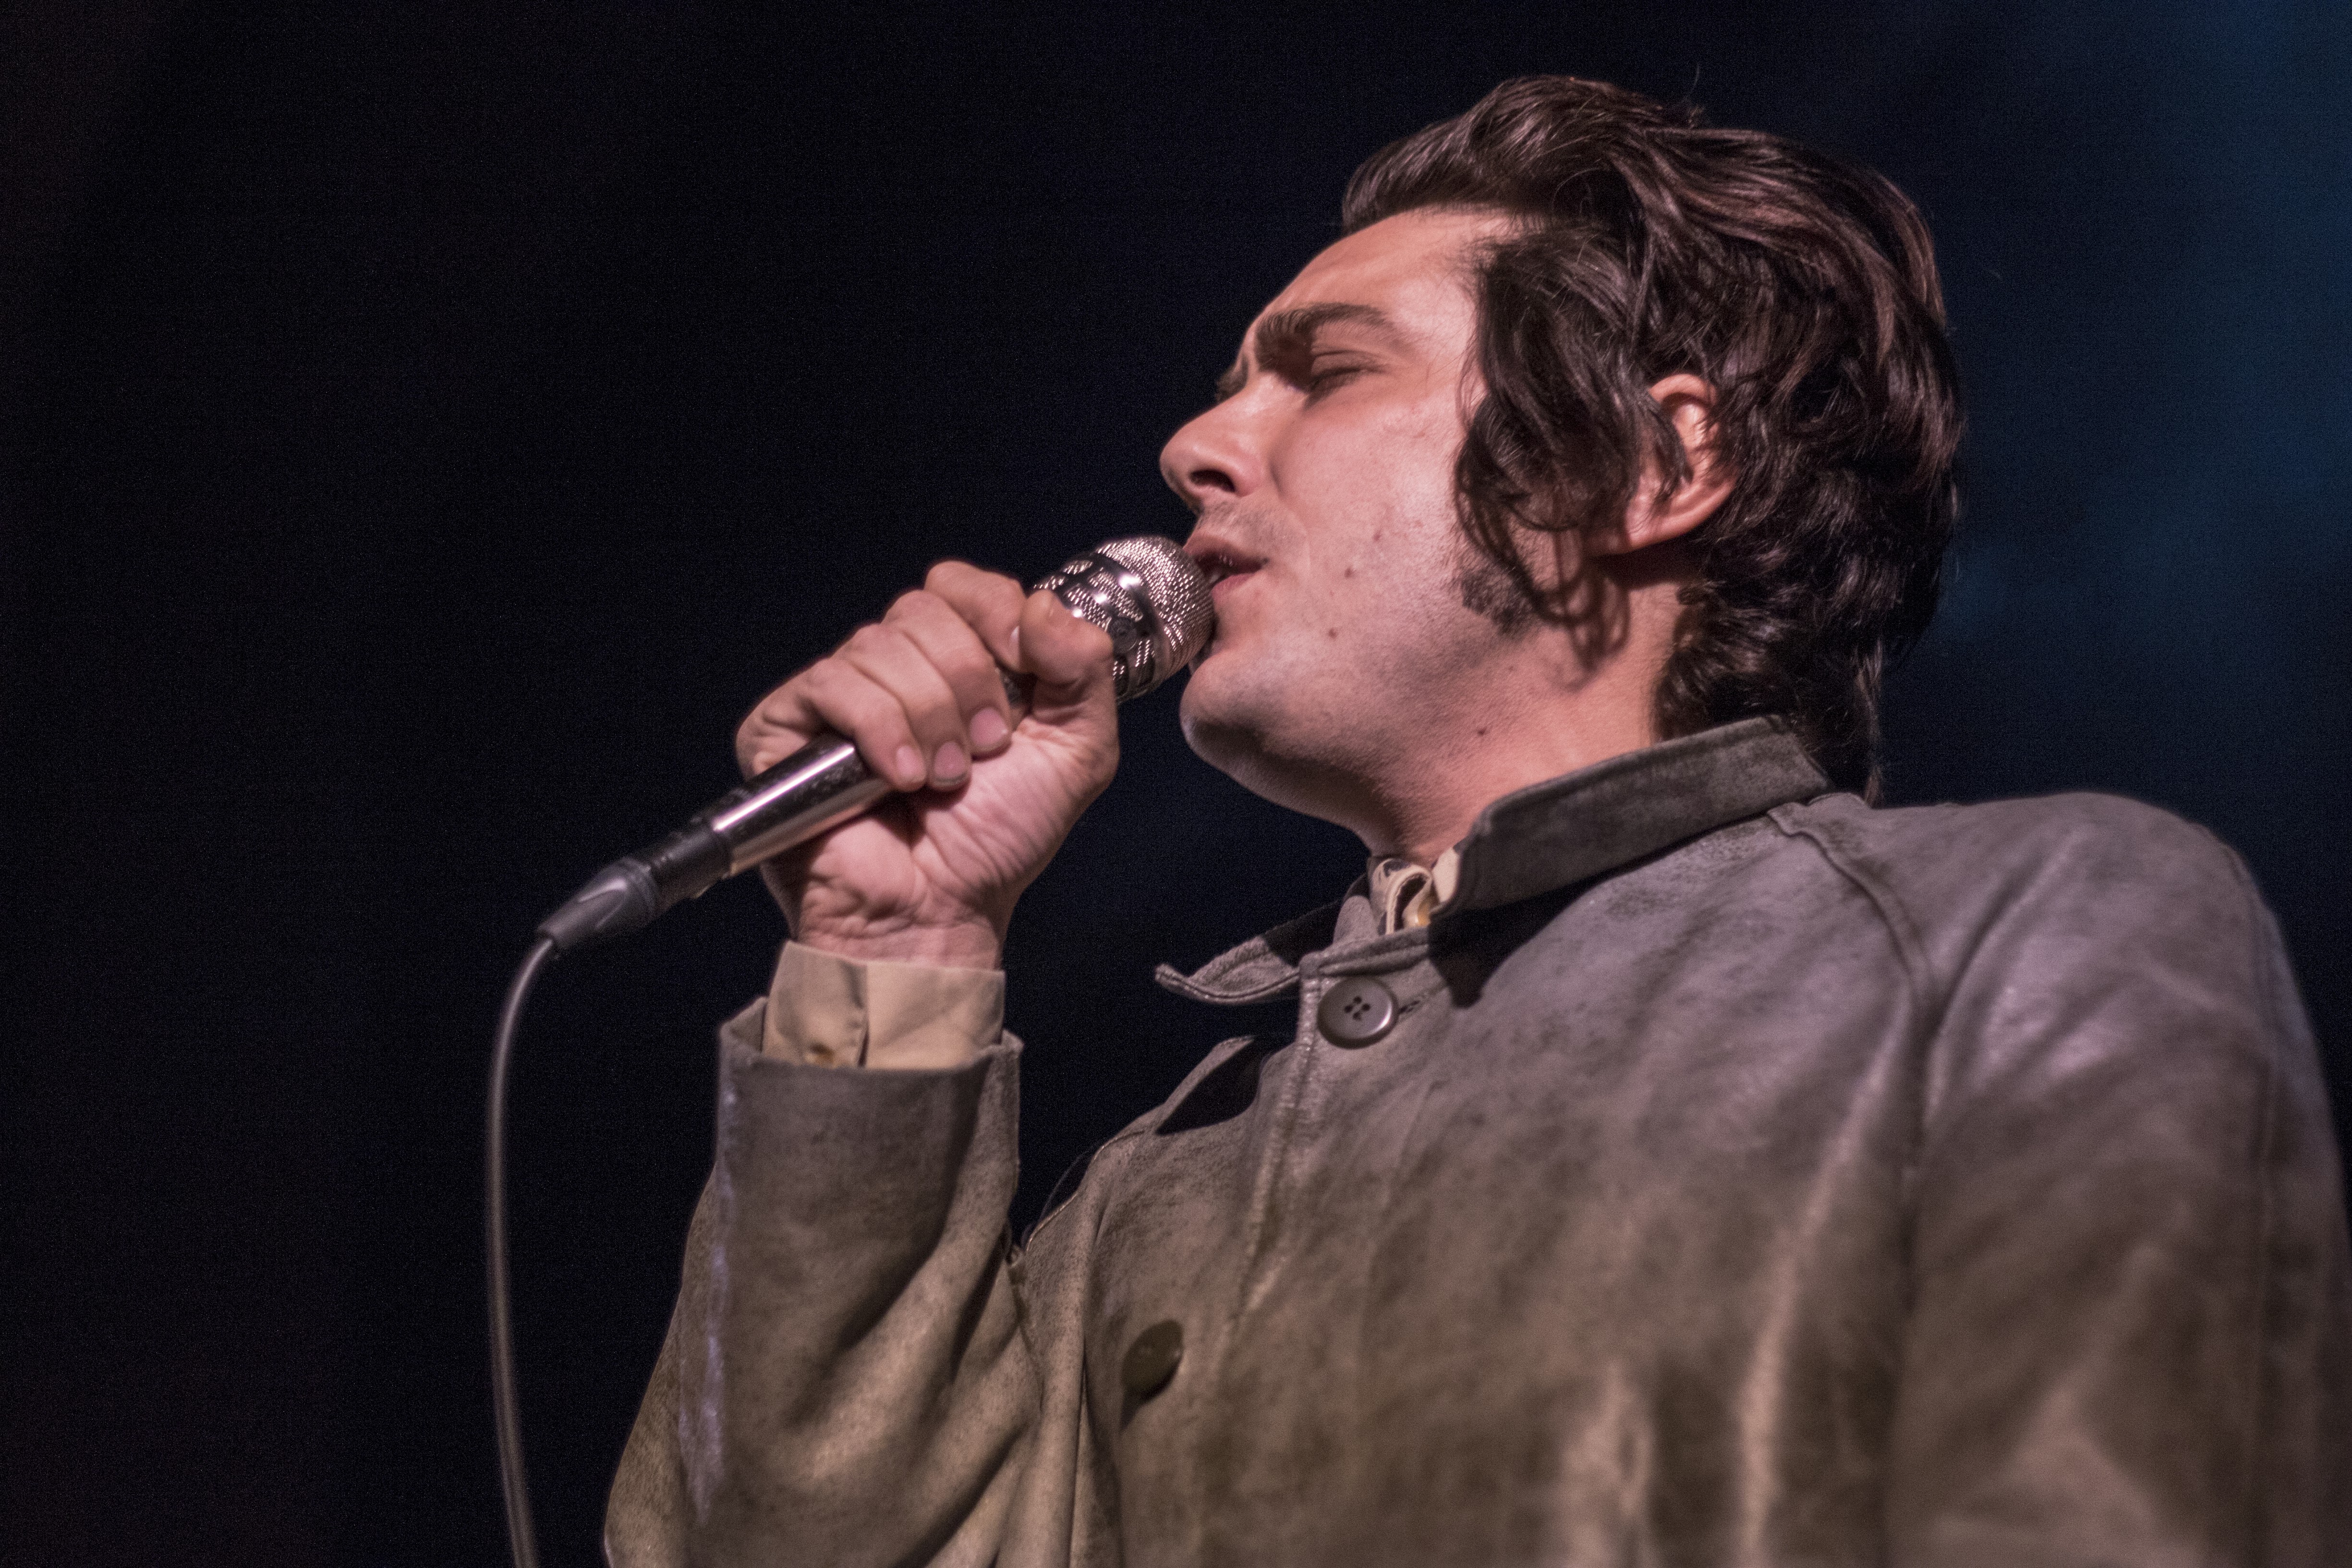 Concert review: The Growlers at Boulder Theater